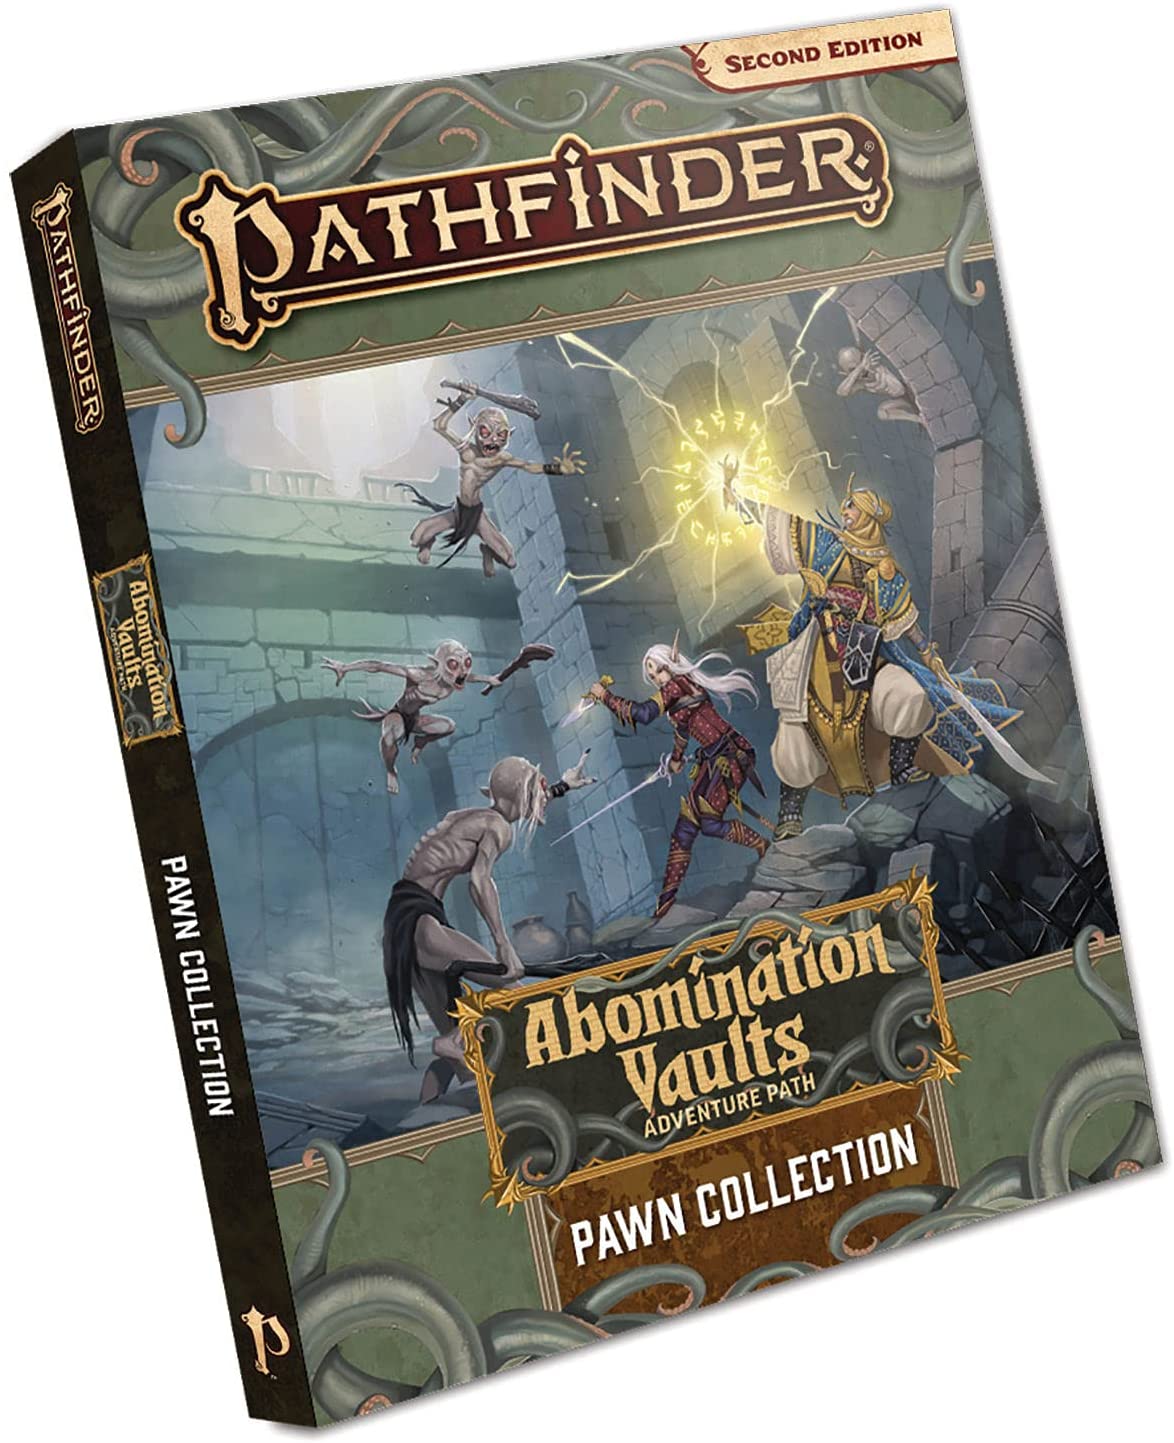 Abomination Vaults Pawn Collection